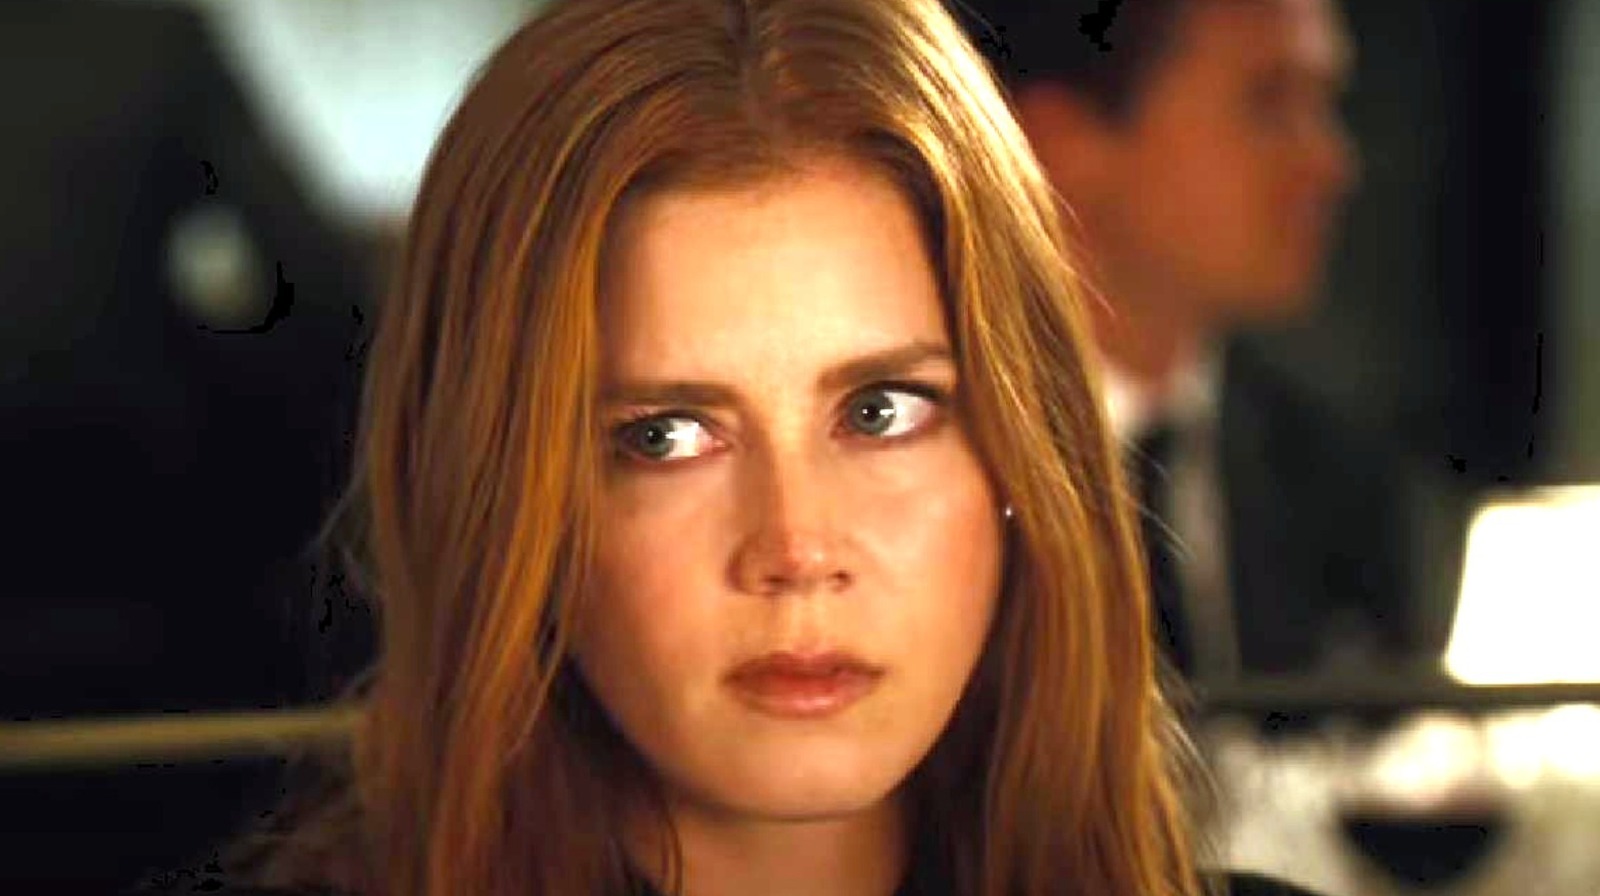 The Most Difficult Scene To Film For Nocturnal Animals Will Surprise You